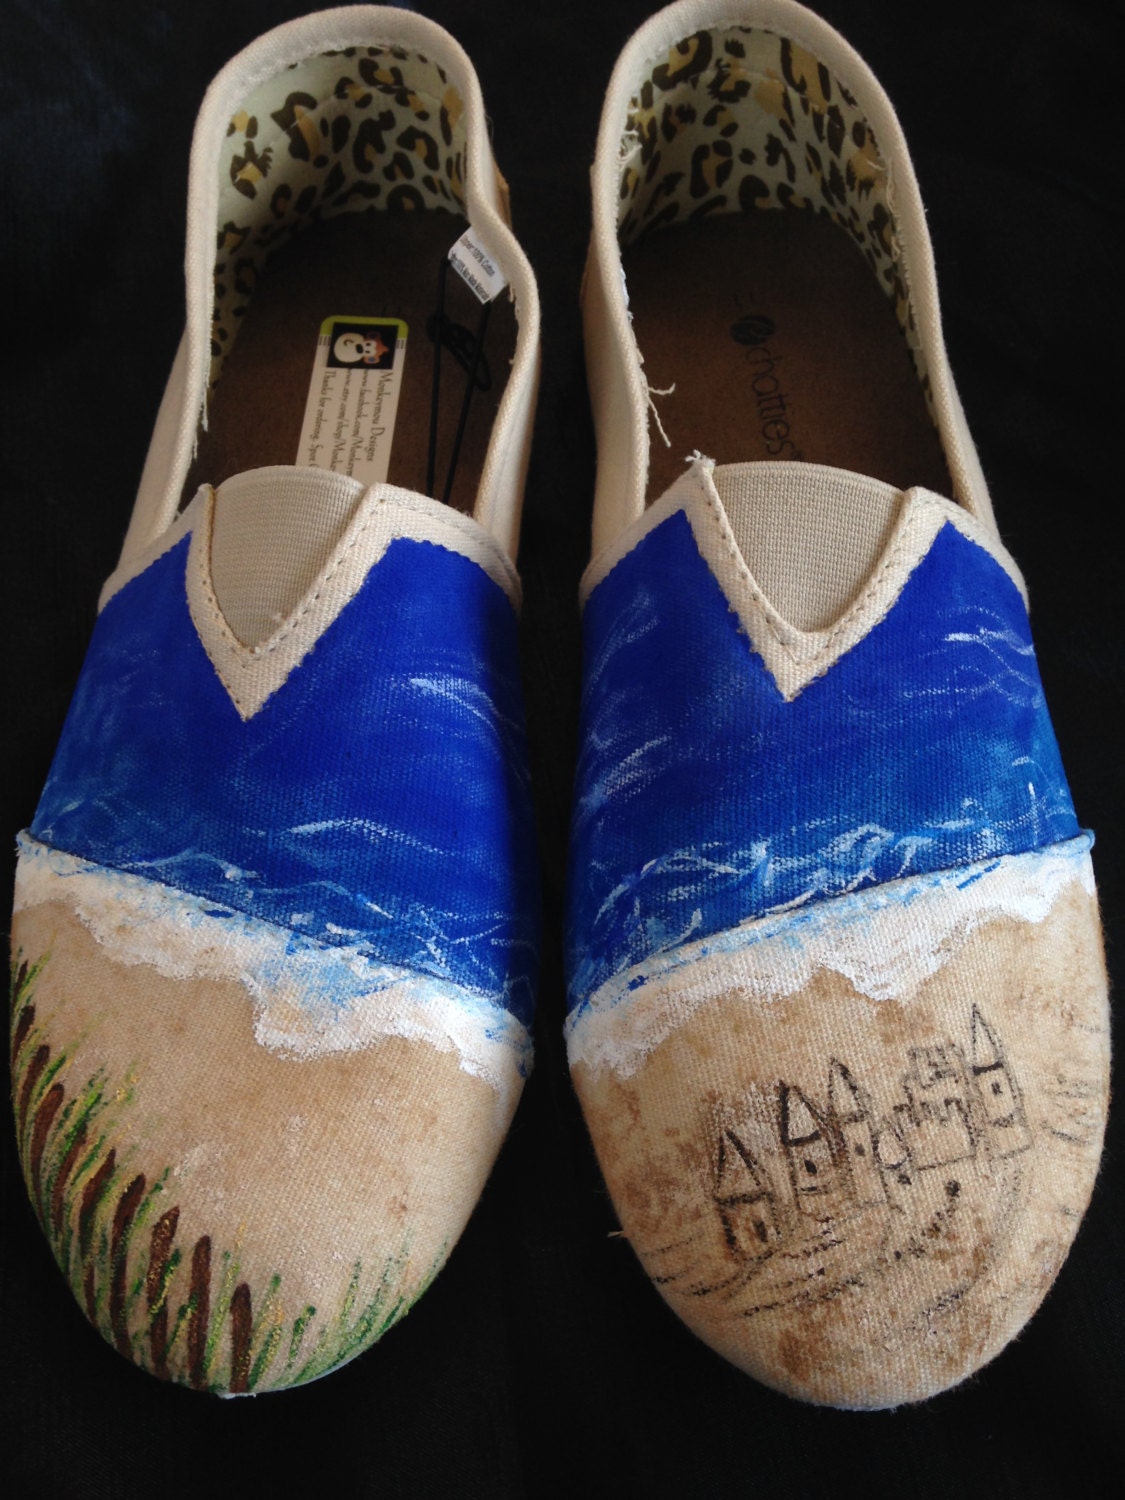 Beach ocean Themed Hand painted shoes by MonkeymouDesigns on Etsy